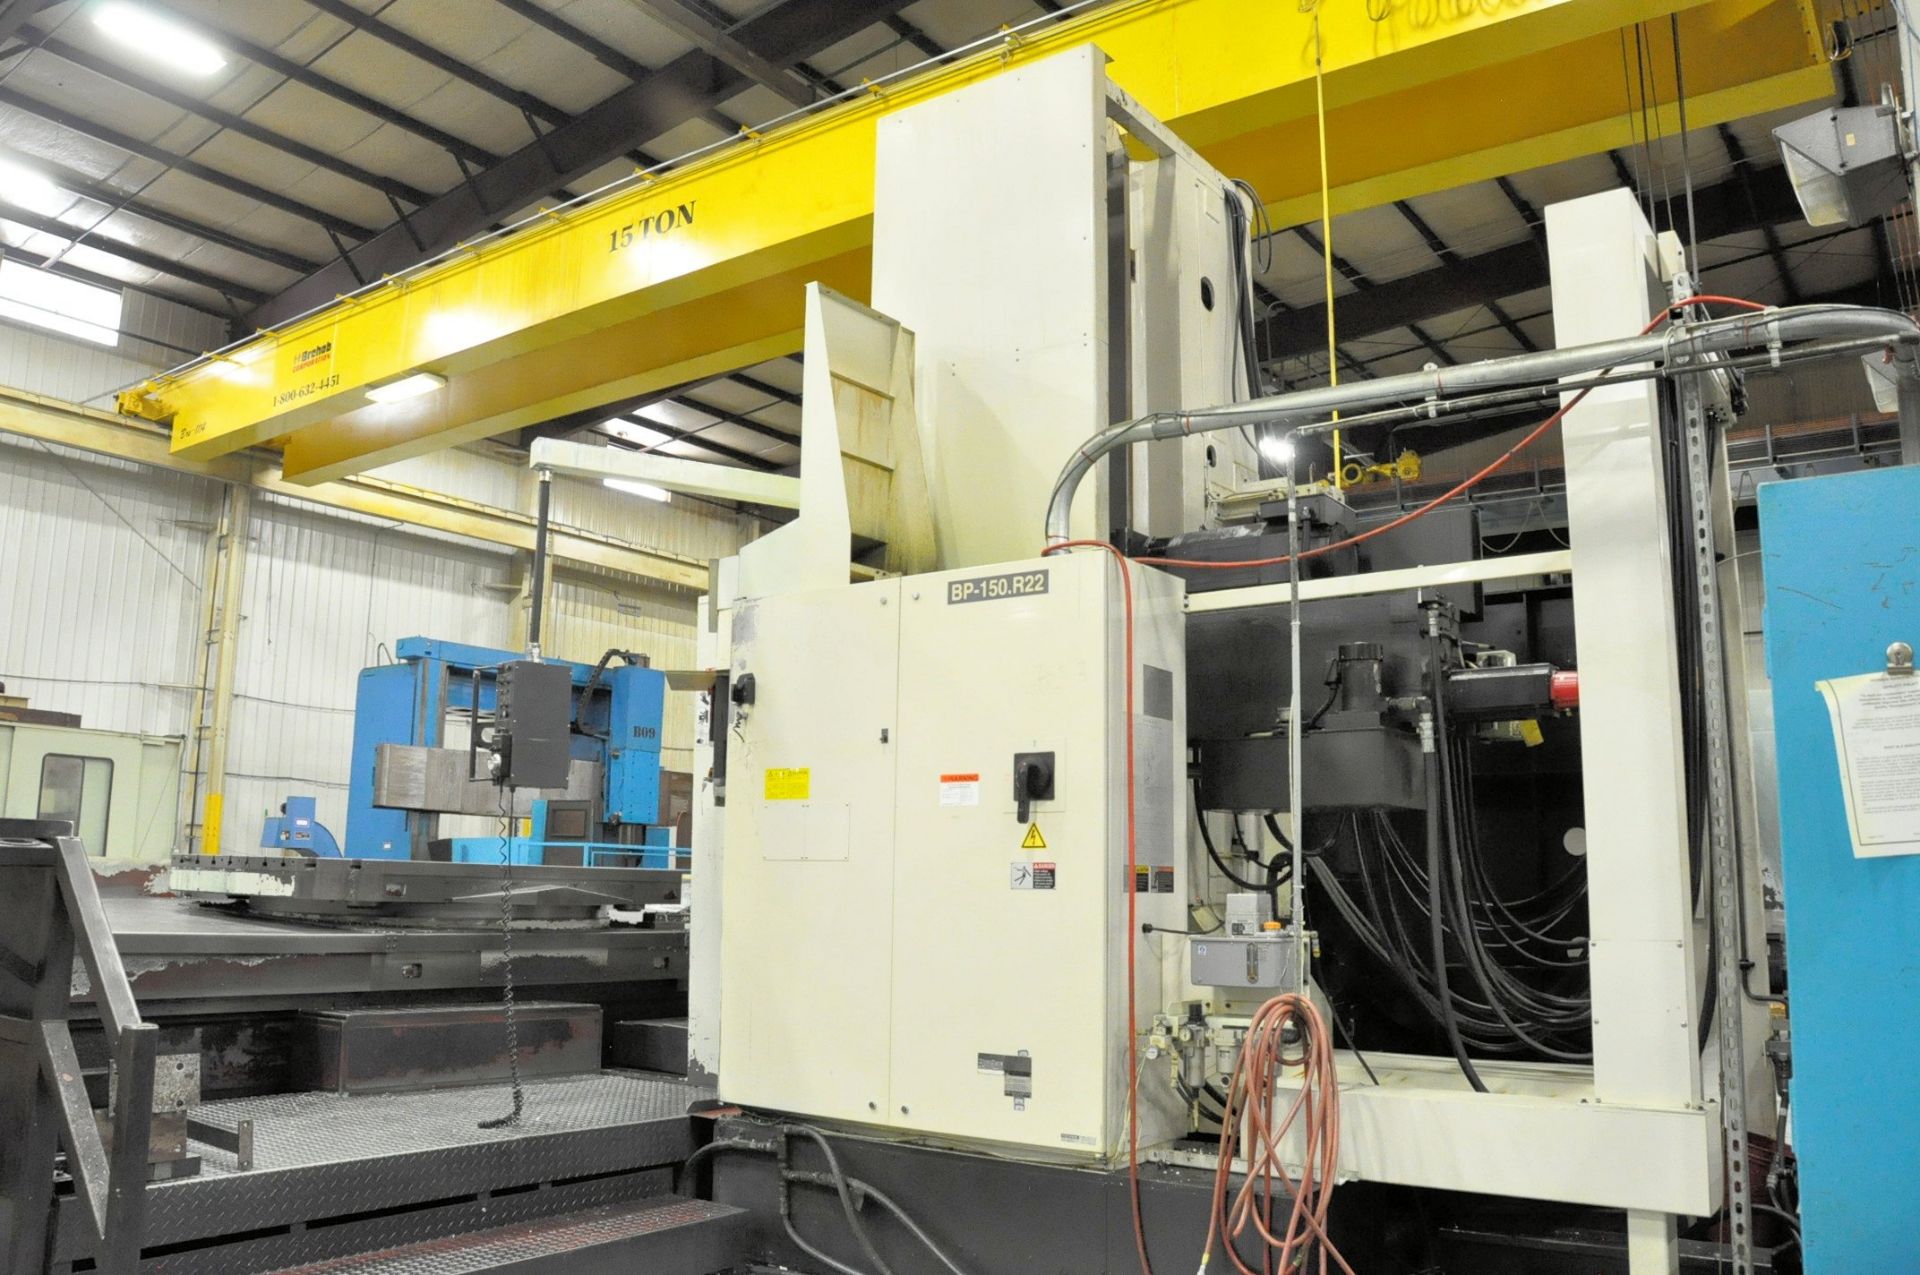 TOSHIBA BP150.R22 CNC Table Type Horizontal Boring Mill (New 2008), 5.9'' Spindle, X-160'', Y-100'', - Image 13 of 18